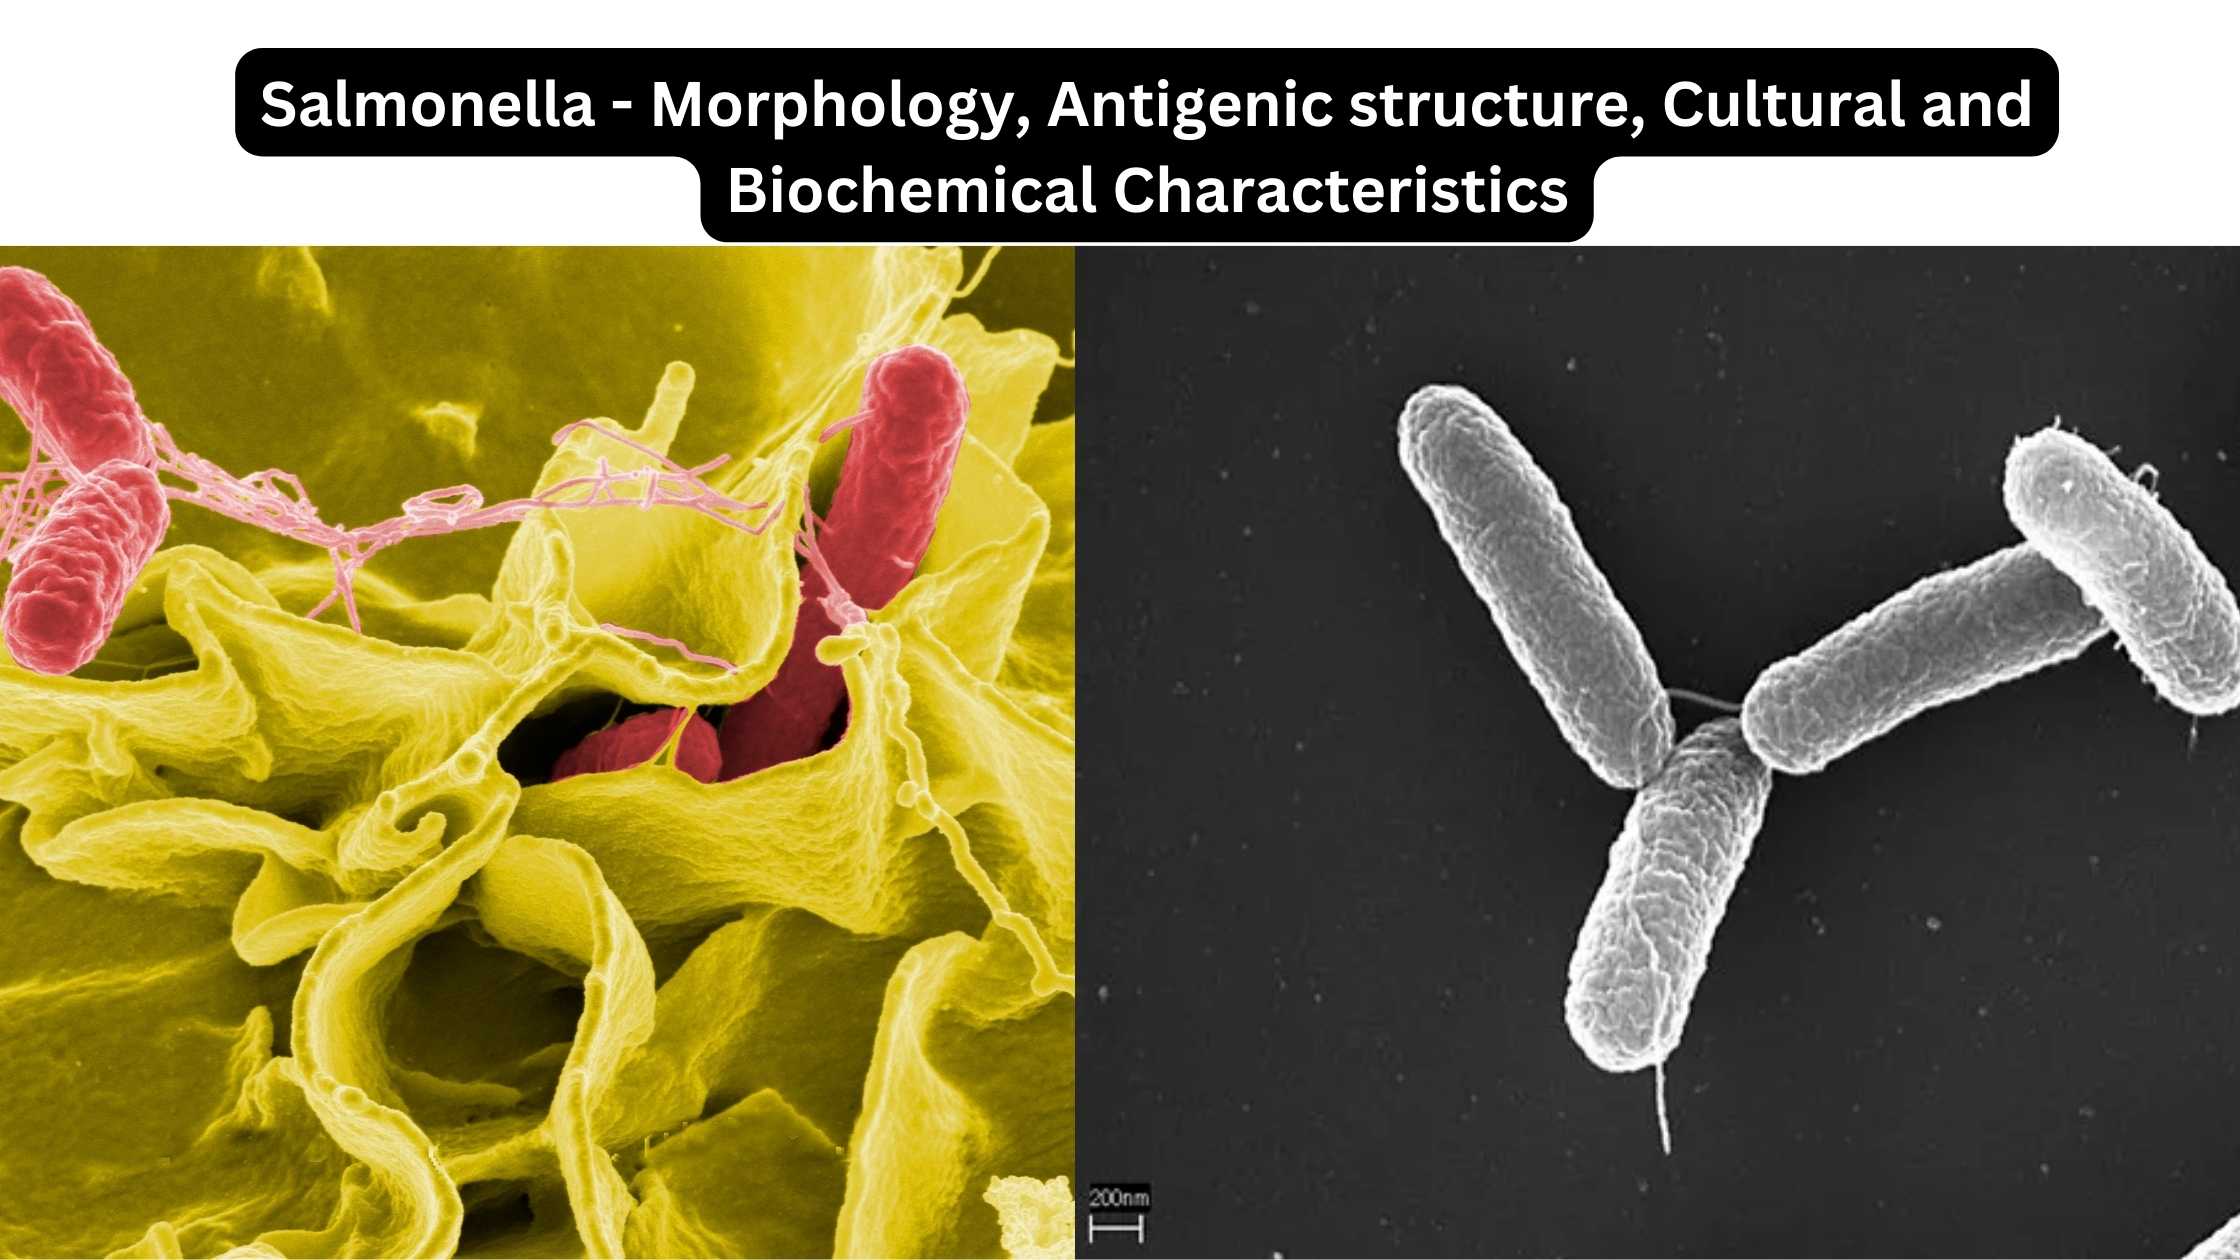 Salmonella - Morphology, Antigenic structure, Cultural and Biochemical Characteristics